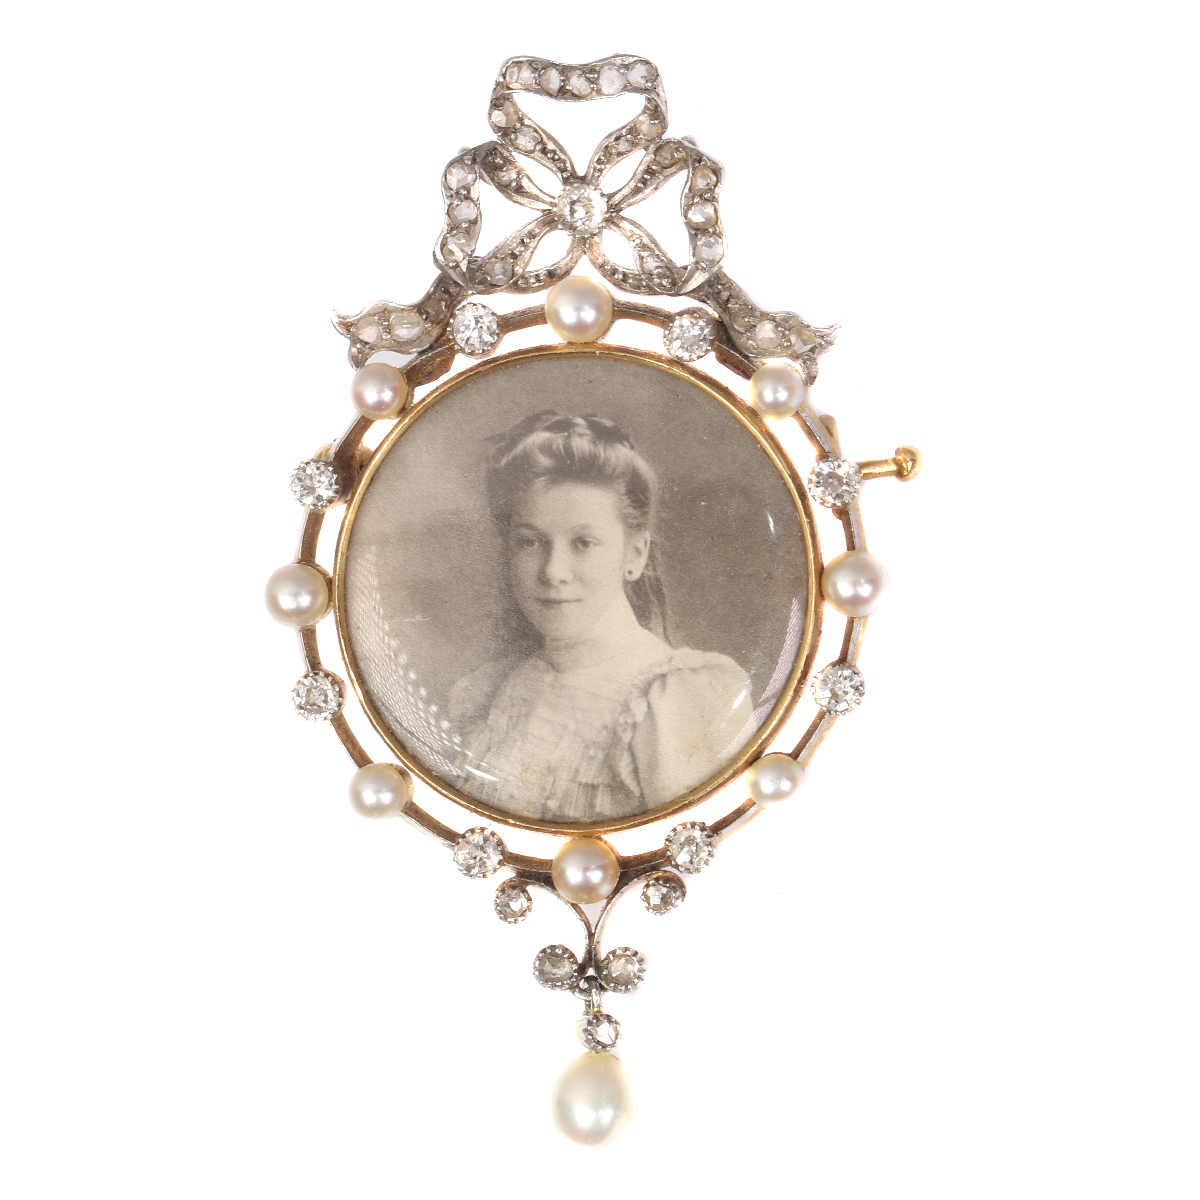 Belle Epoque old picture brooch set with diamonds and pearls